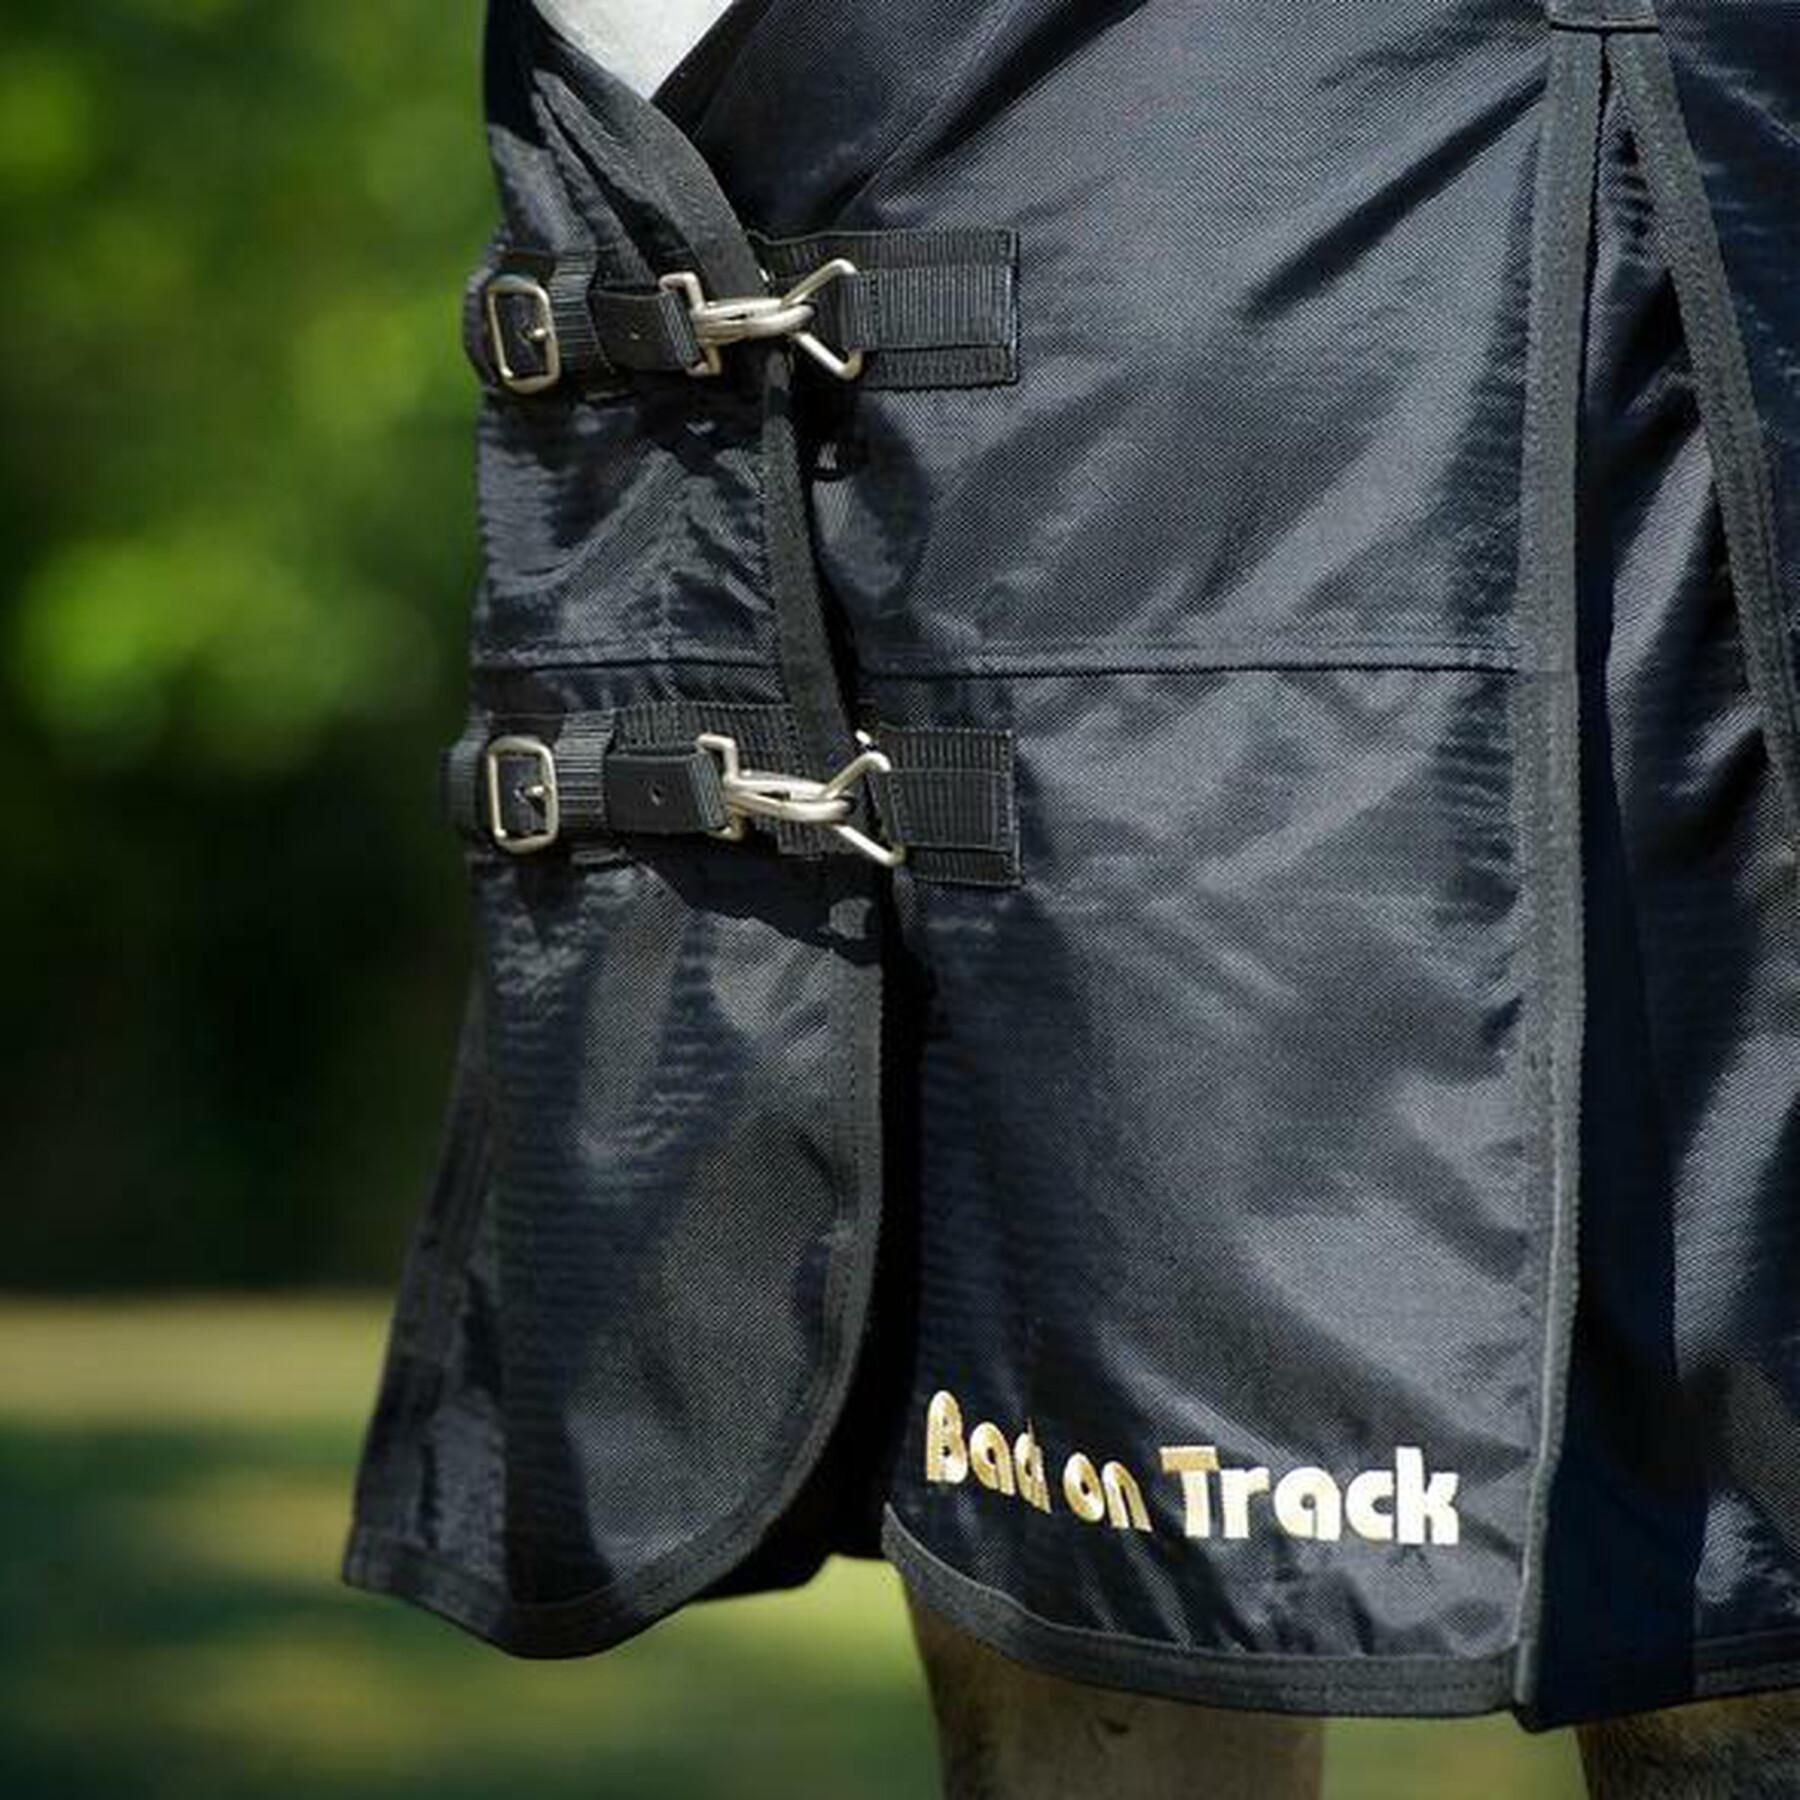 Manta equitación impermeable Back on Track 1680D